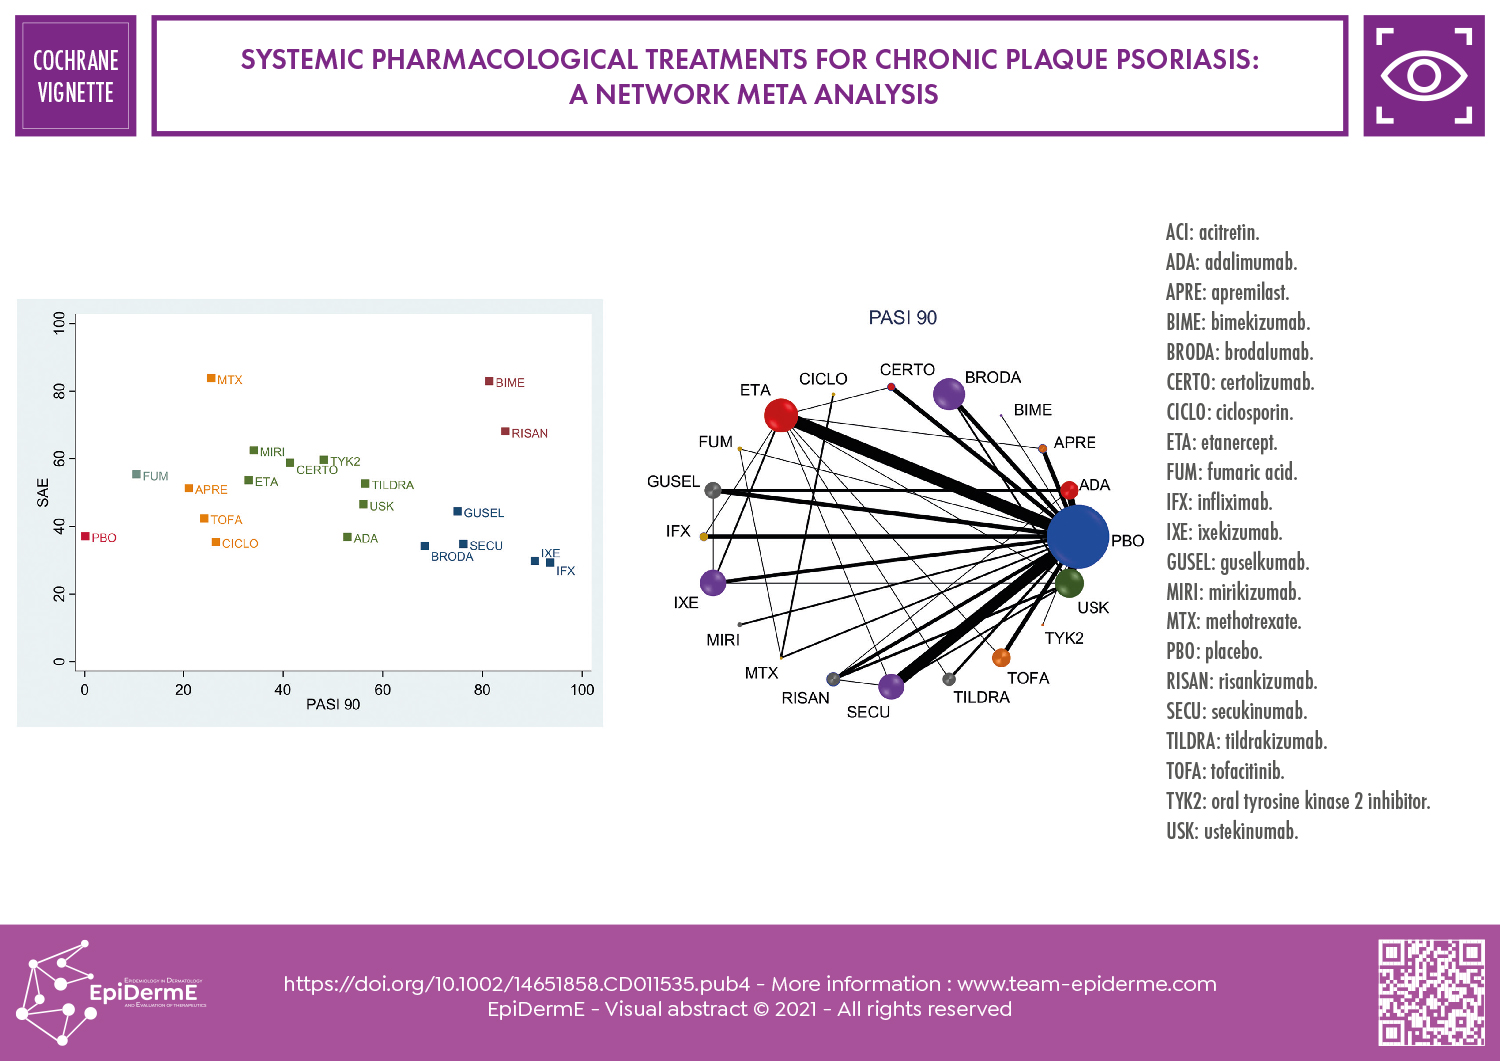 Systemic pharmacological treatments for chronic plaque psoriasis: a network meta-analysis